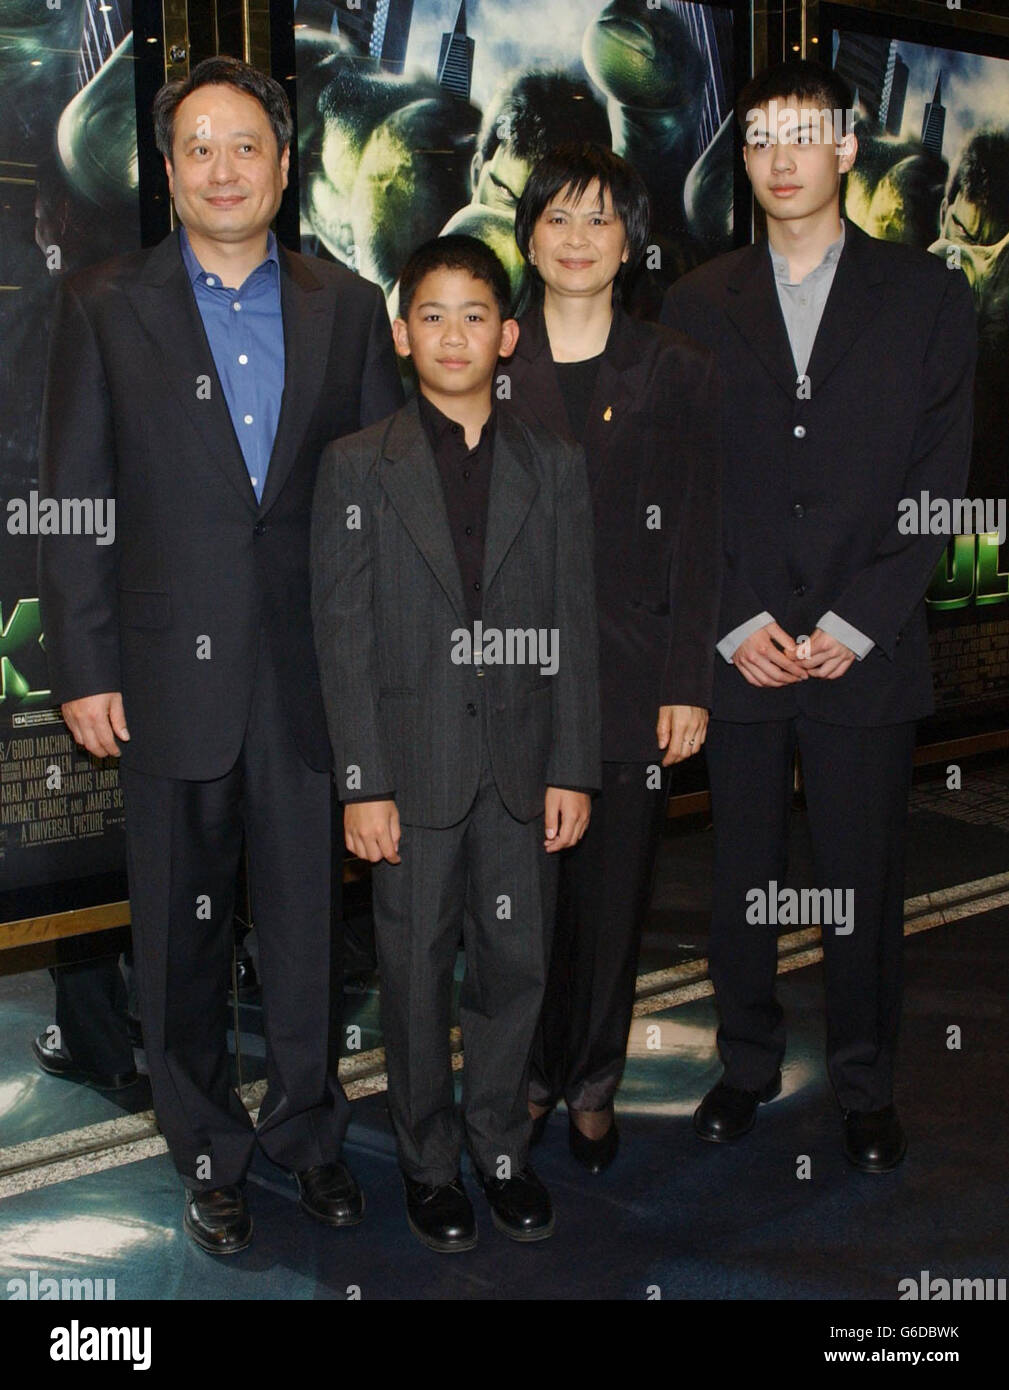 Director Ang Lee (L) and his family arrives at the premiere of The Hulk at the Empire cinema in London's Leicester Square. Stock Photo